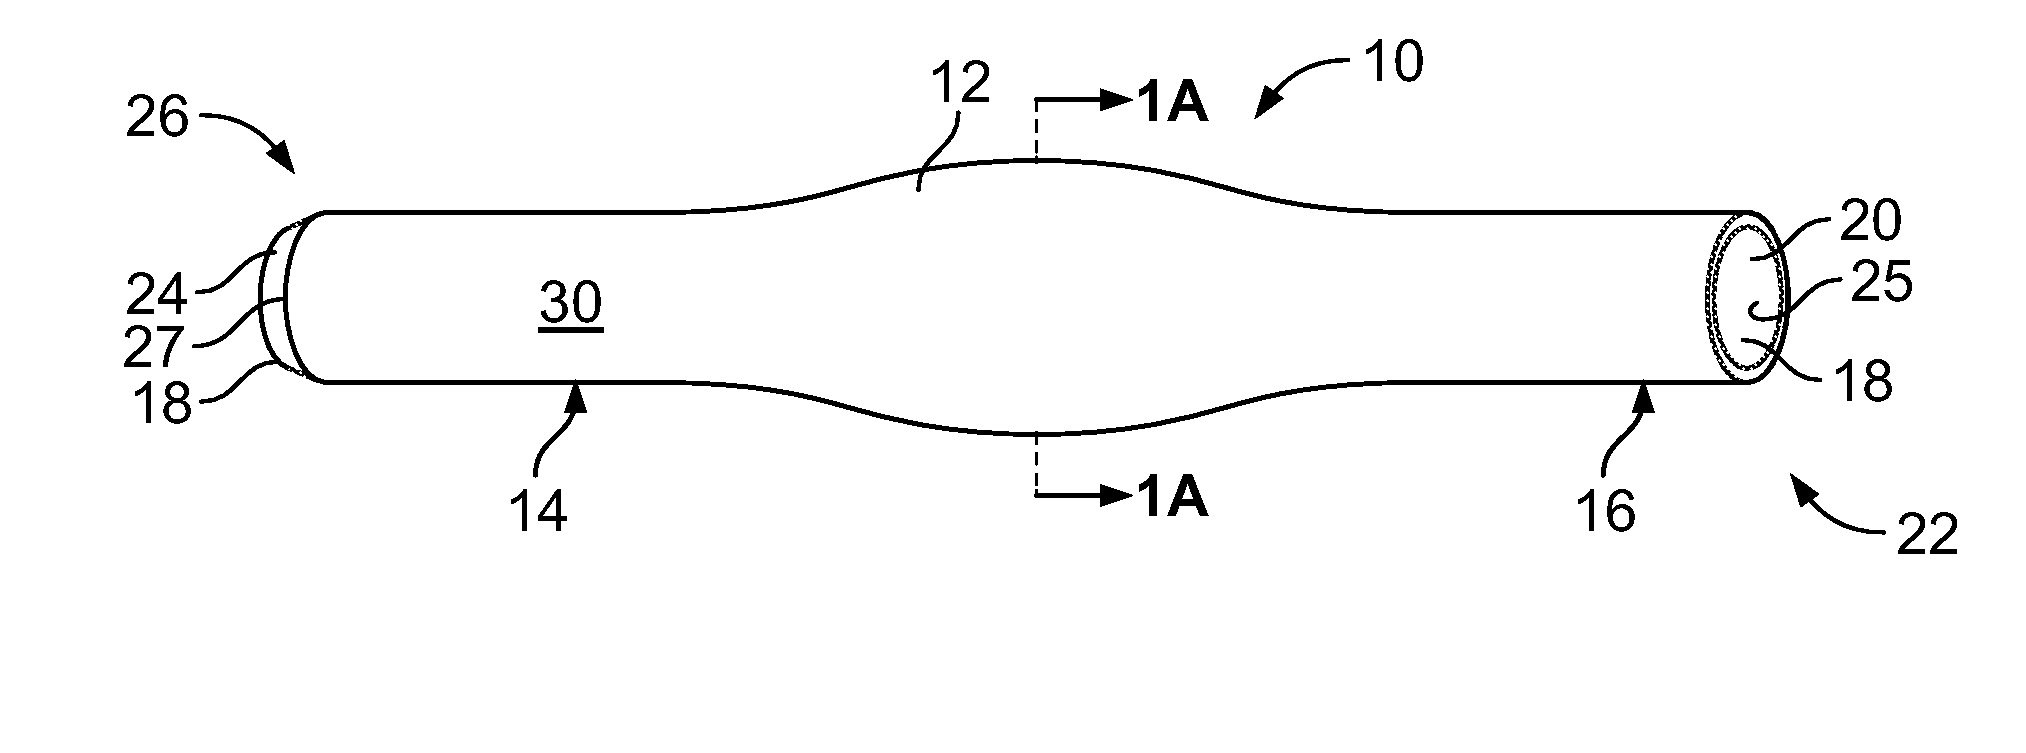 Stent device for anastomoses of blood vessels and other tubular organs